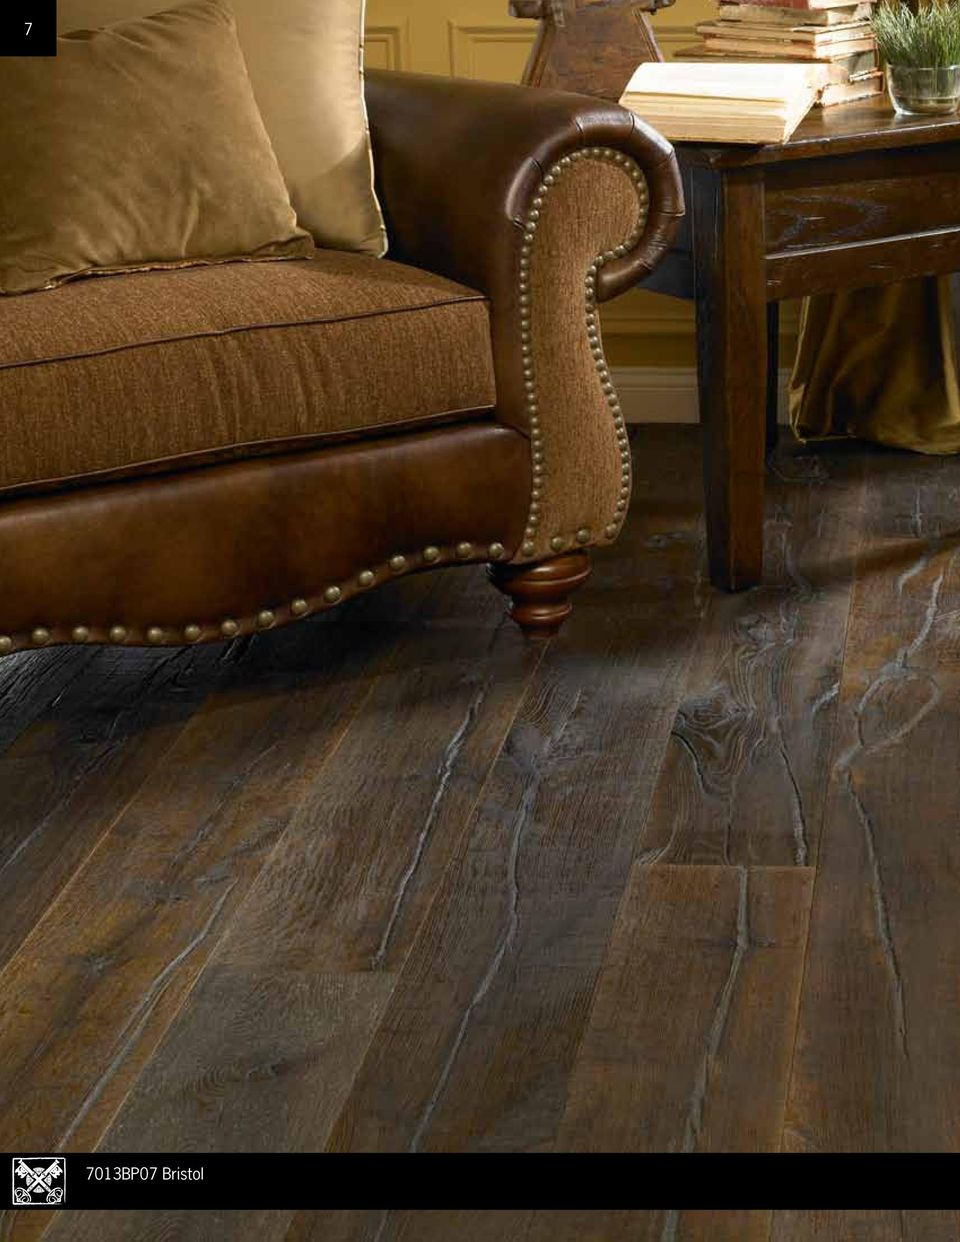 Homerwood Hardwood Flooring Reviews Of Make Any Home A Castle Pdf With Regard To Bristol 